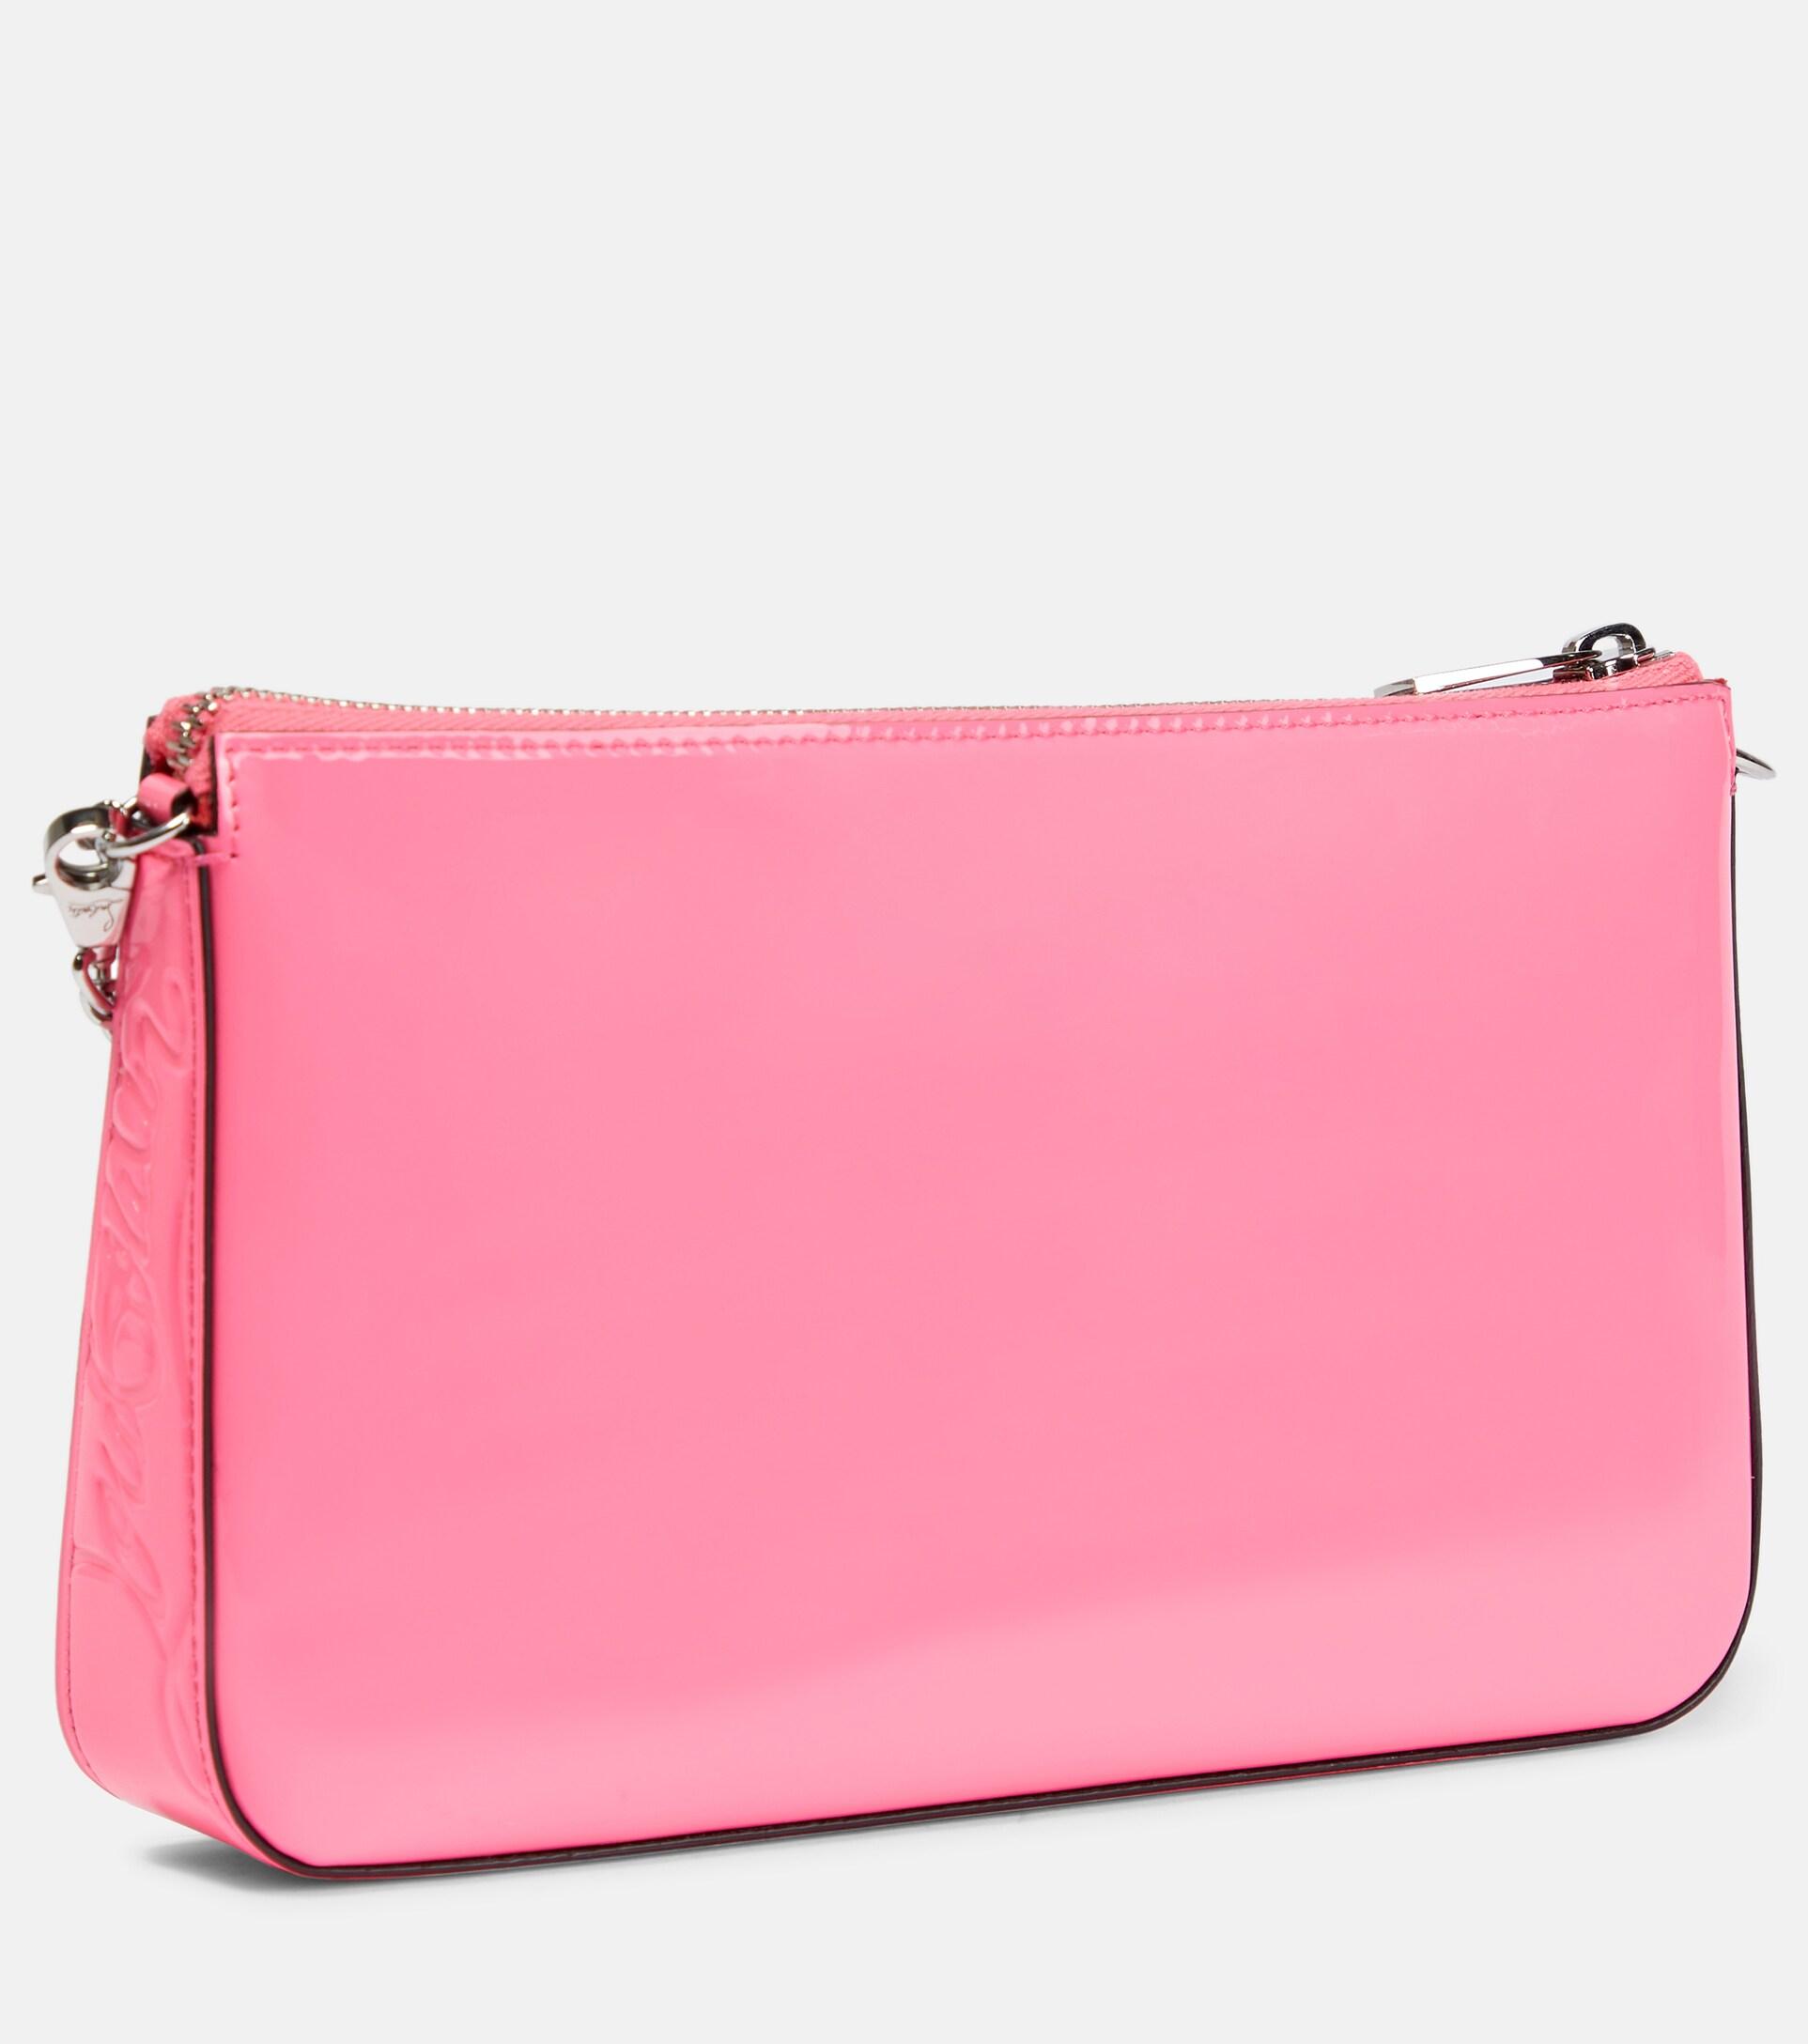 Christian Louboutin - Authenticated Clutch Bag - Patent Leather Pink Plain for Women, Good Condition